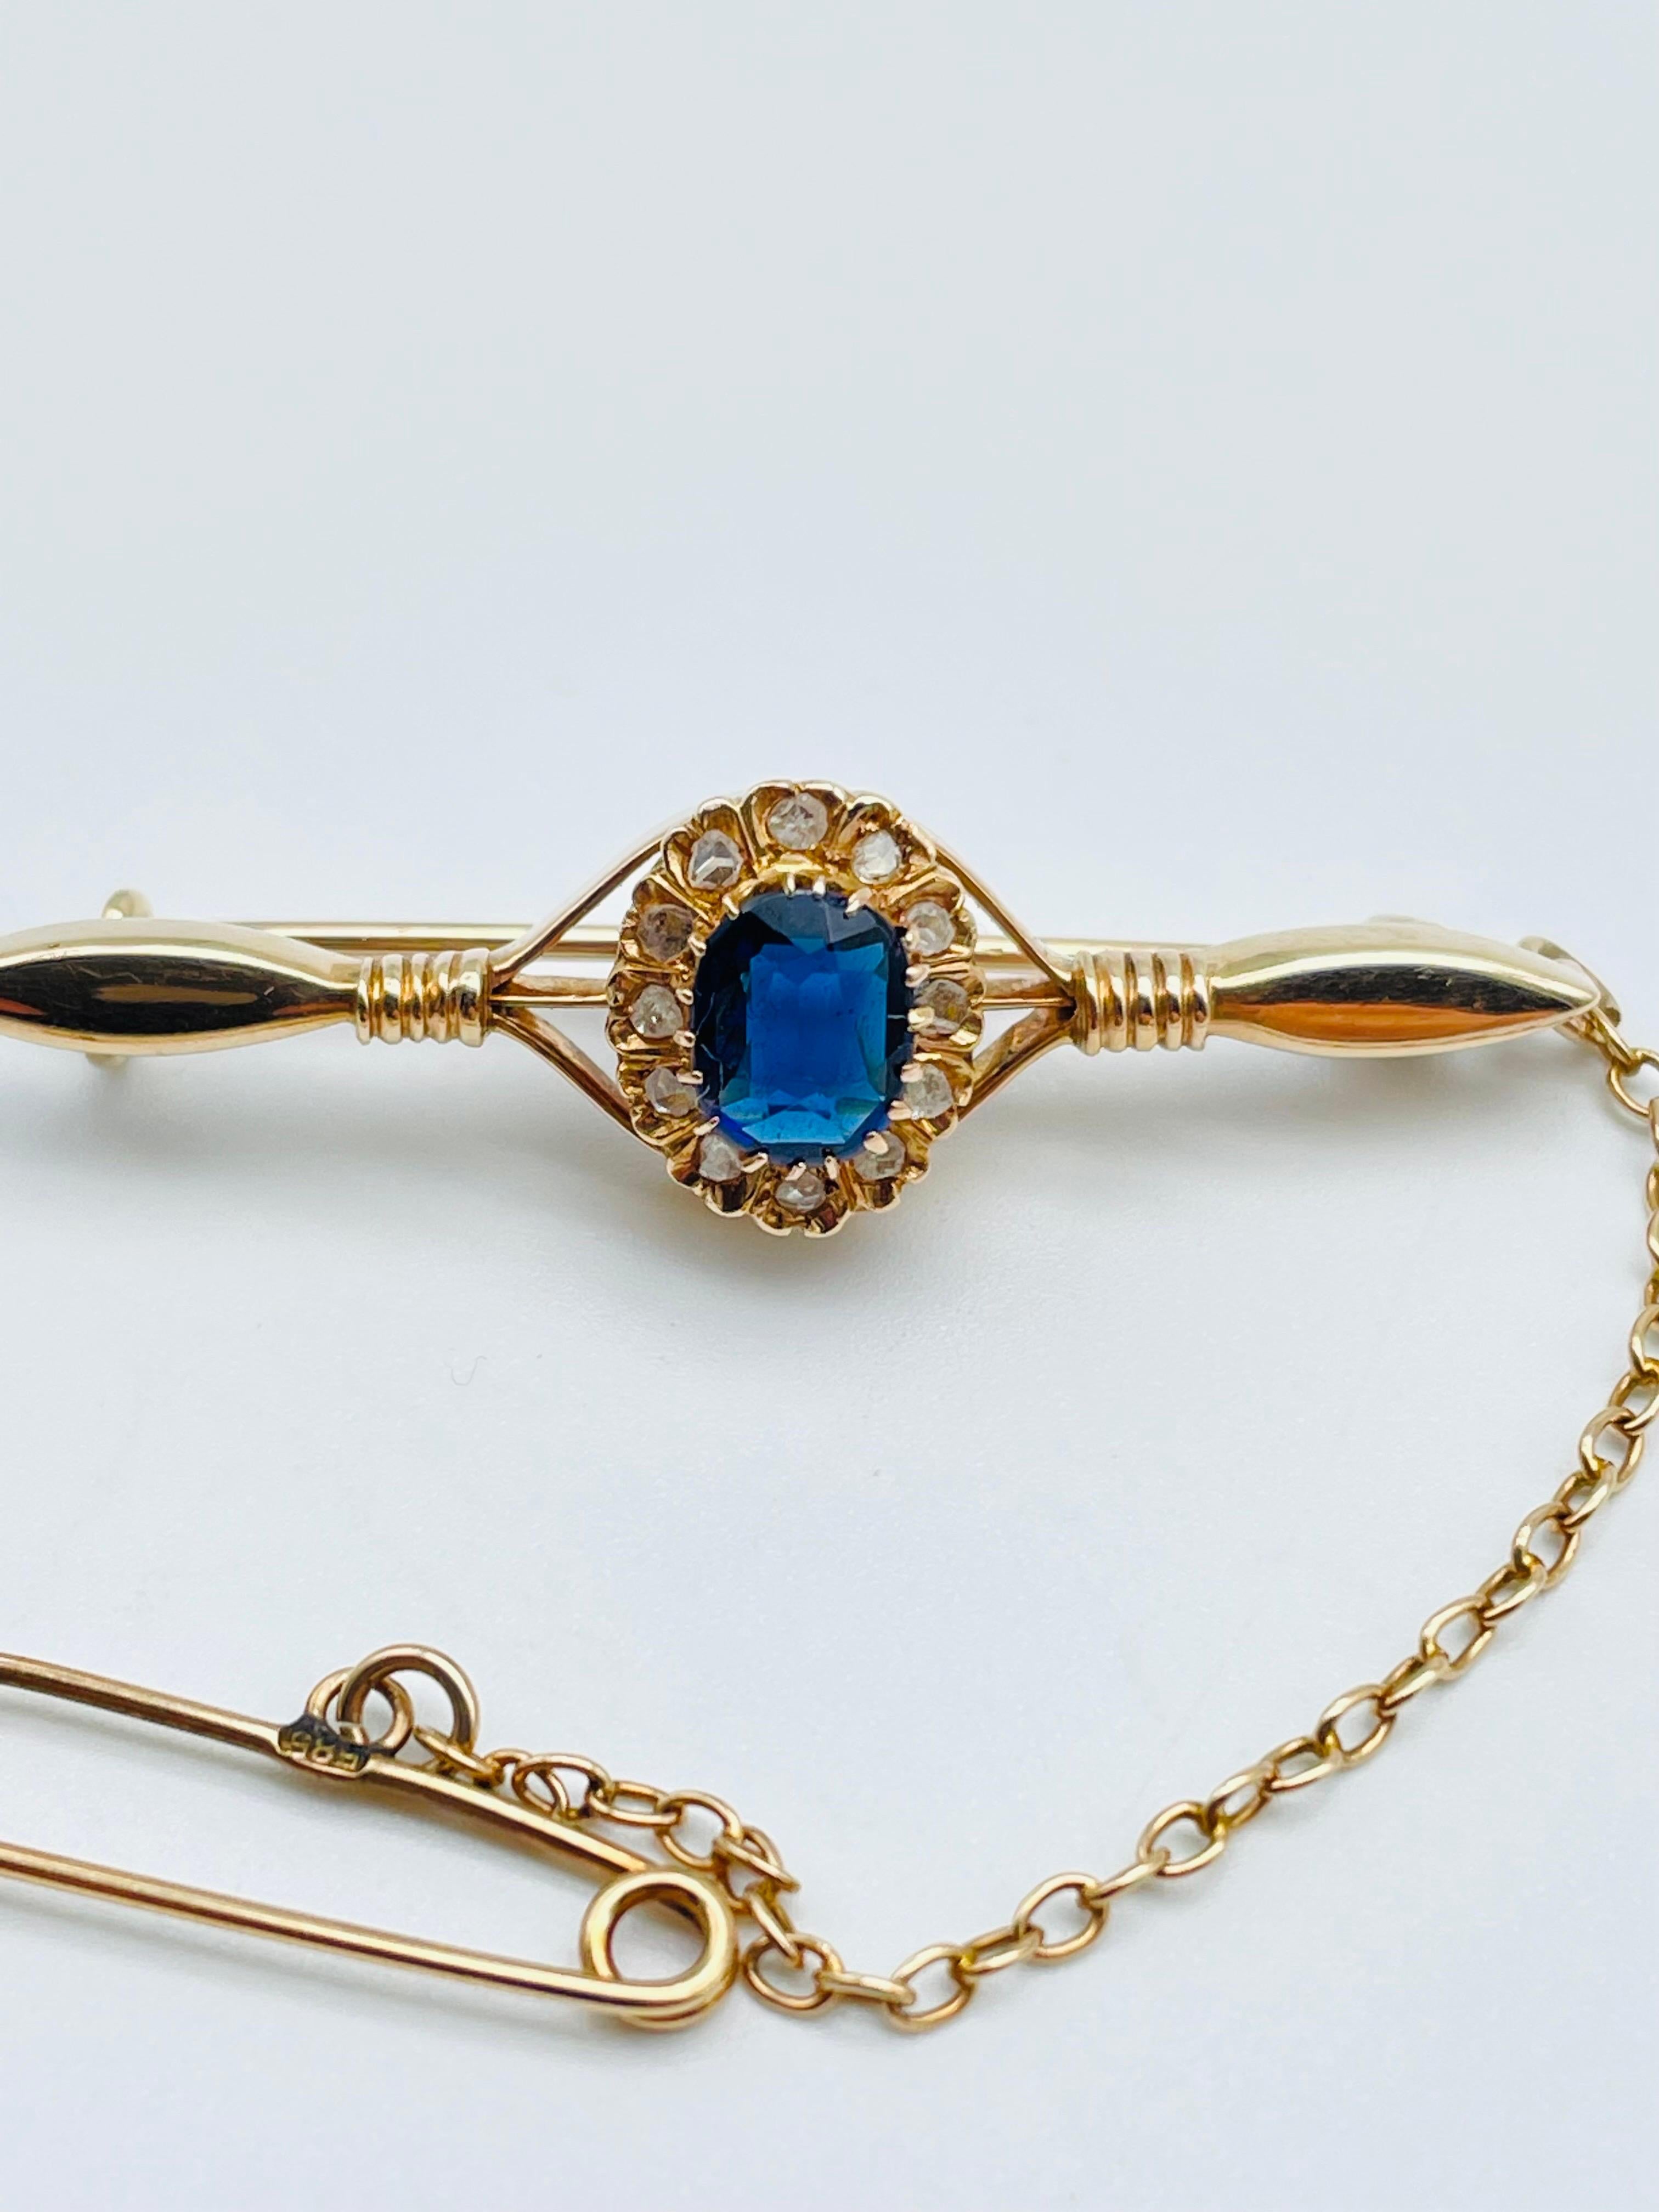 This antique 14k gold bar brooch is an exquisite piece of jewelry that exudes elegance and charm. The rose gold setting is finely crafted, with every detail meticulously executed. The centerpiece of the brooch is a polished tanzanite, with a